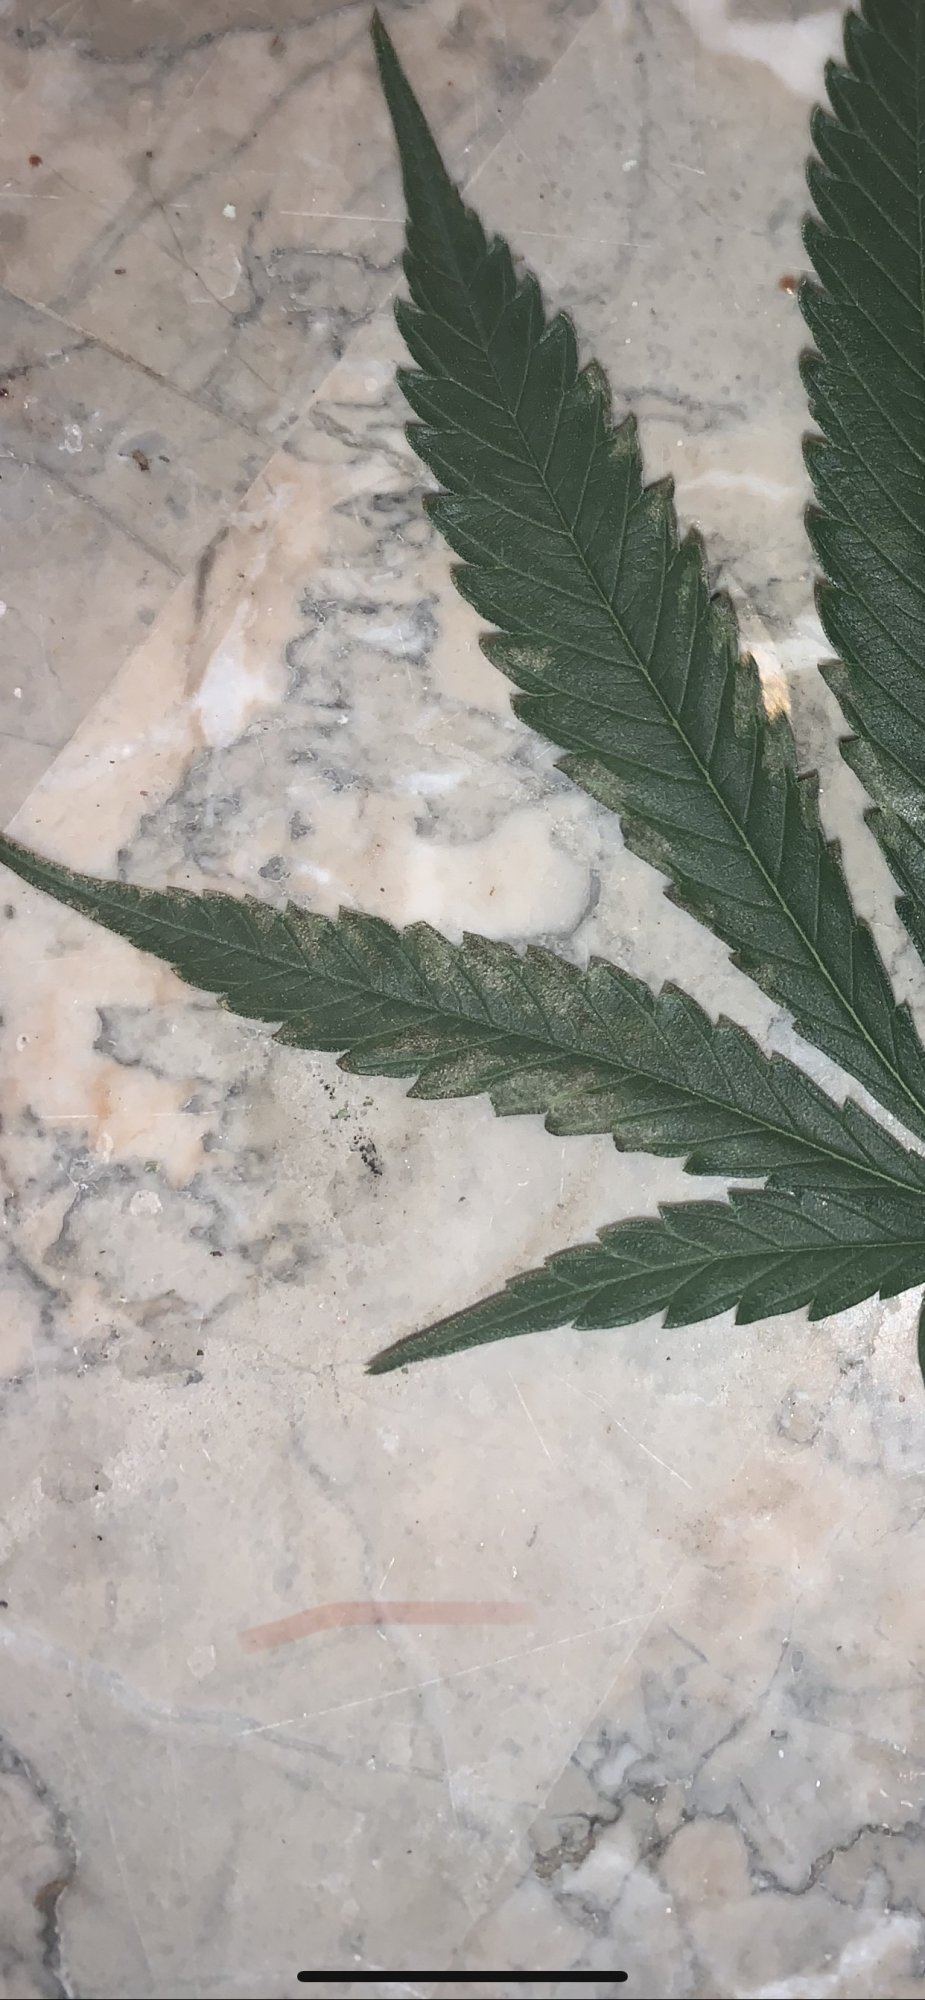 Help not sure whats causing these issues on my leaves 2